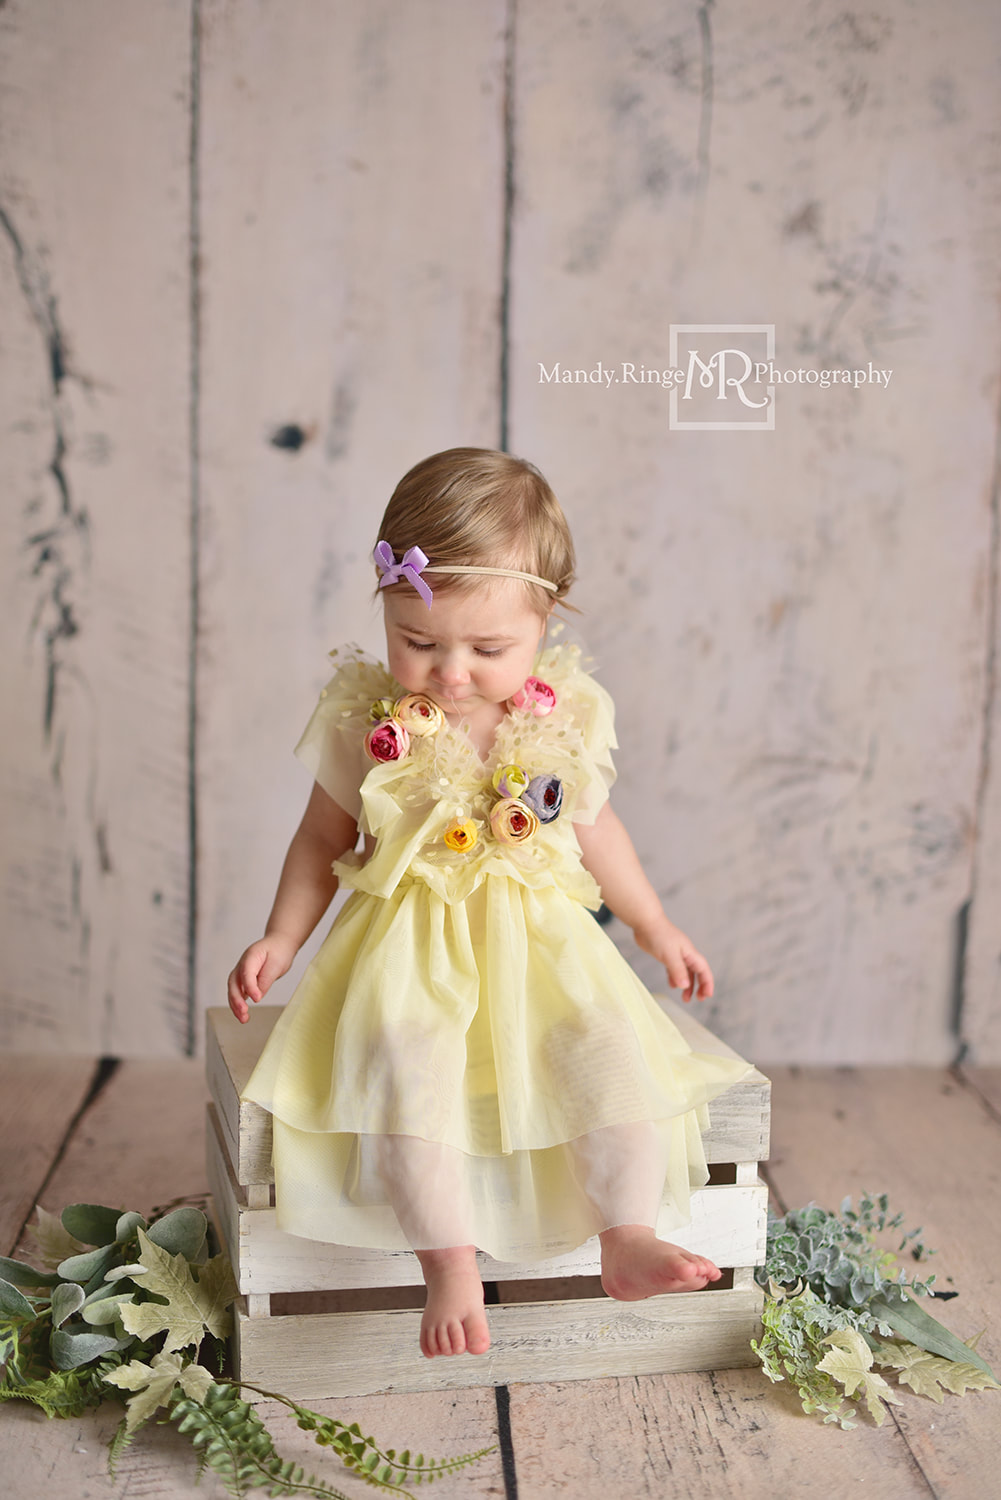 Milestone Session // Girl sitter session, 6 to 12 months, Nora dress from Cora & Violet, Backdrop from Intuitions Backdrops // St. Charles, IL studio // Mandy Ringe Photography